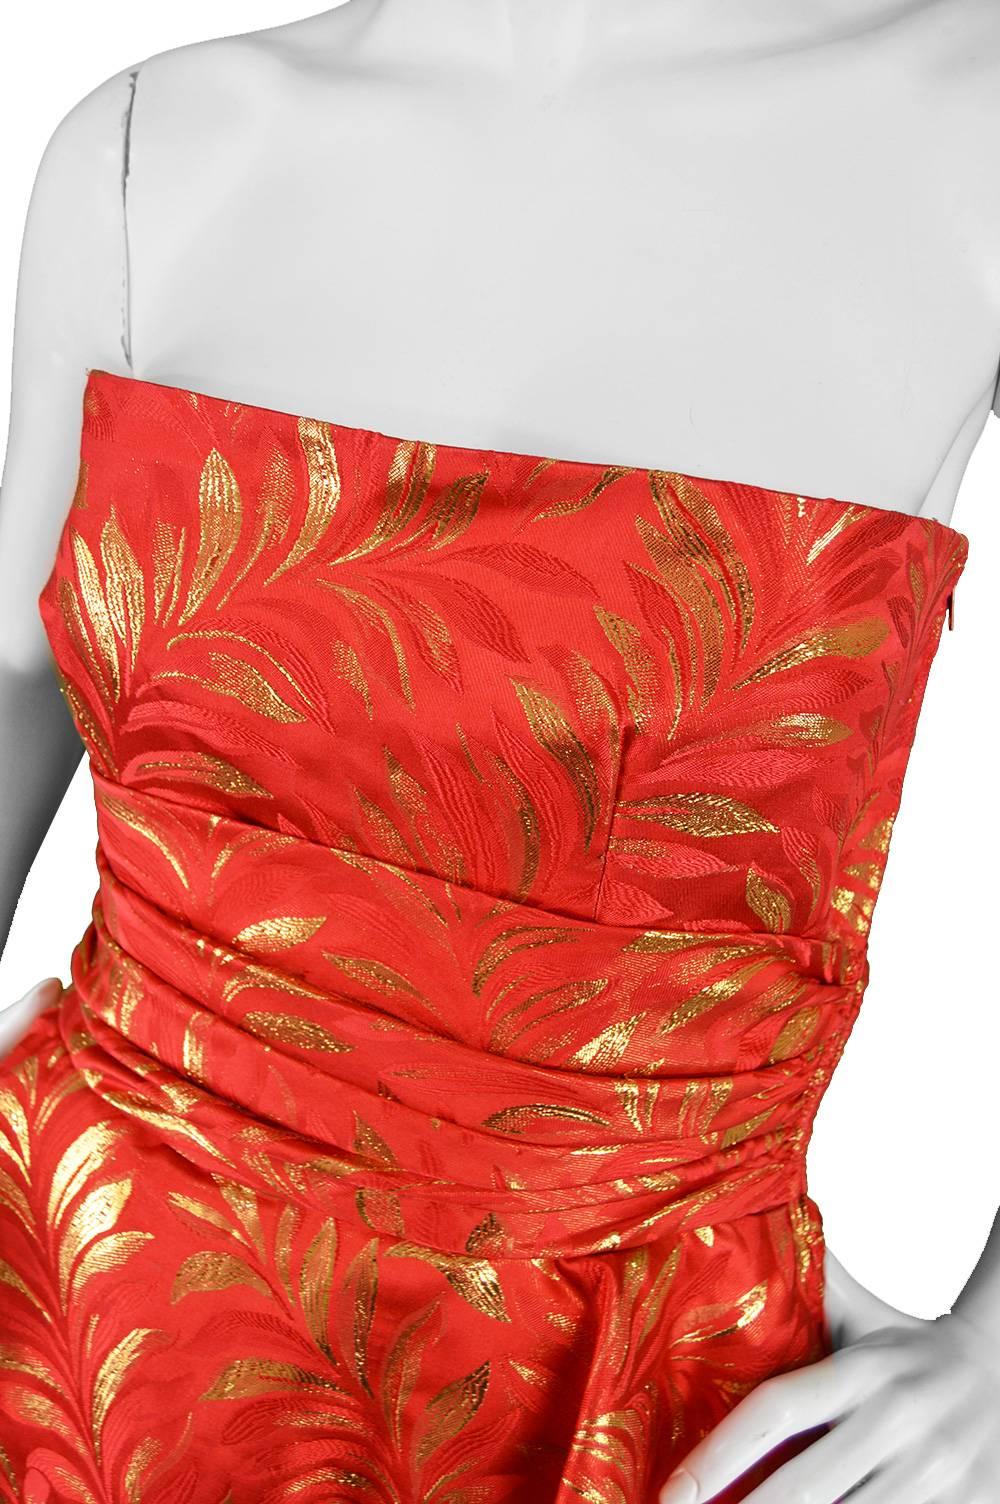 Lanvin Red & Gold Silk Brocade Peplum Vintage Cocktail Evening Dress, 1980s In Excellent Condition For Sale In Doncaster, South Yorkshire